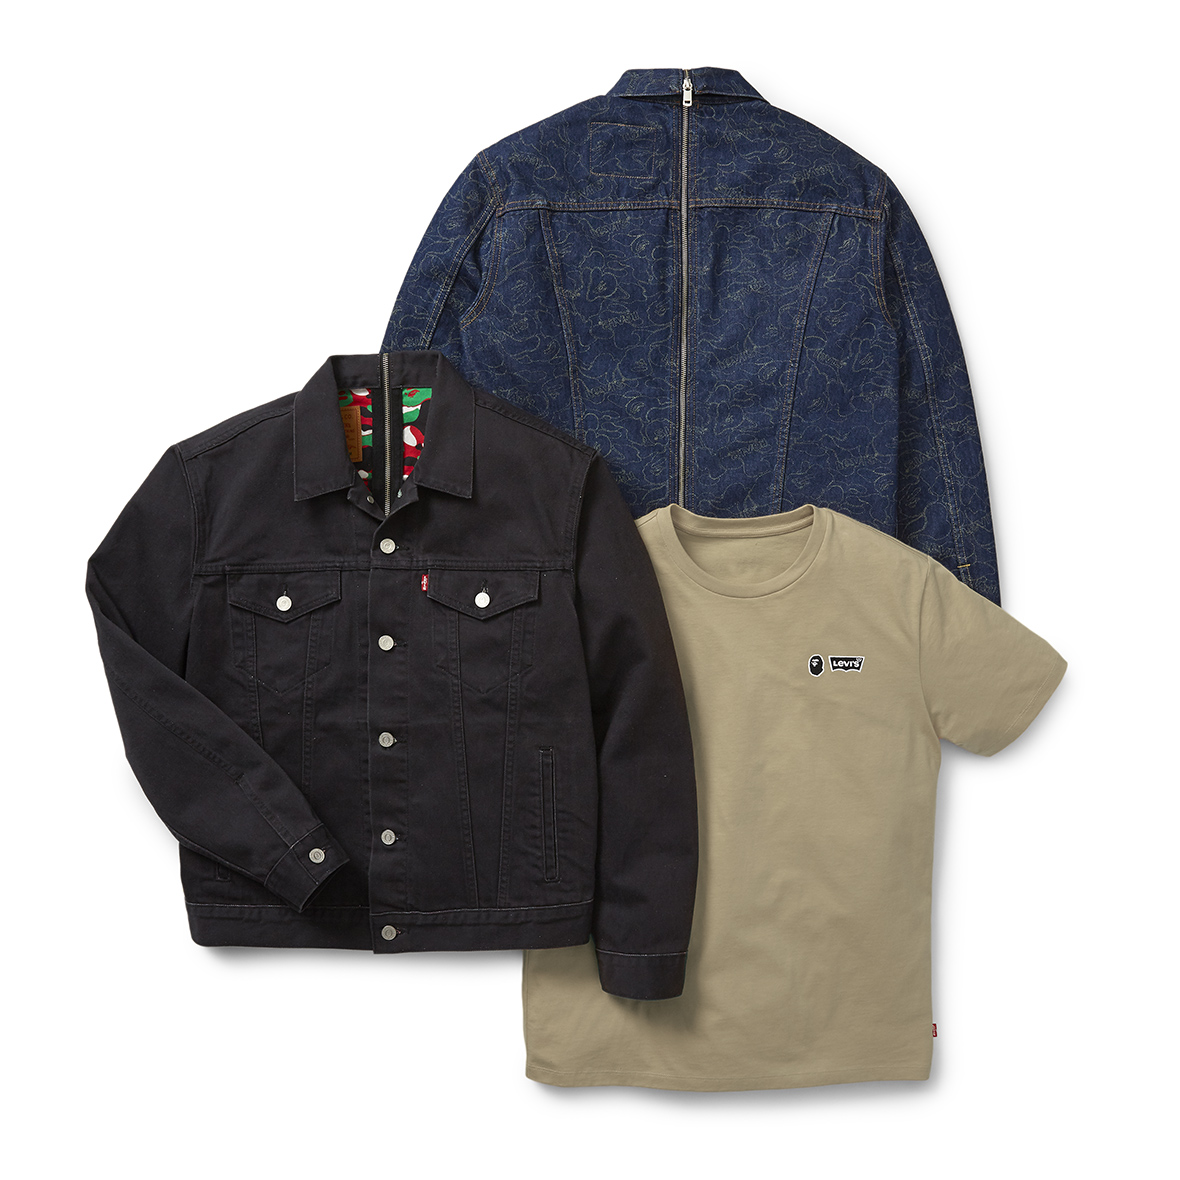 Levi's introduces its collaboration with Bape at Sole DXB | Esquire Middle  East – The Region's Best Men's Magazine